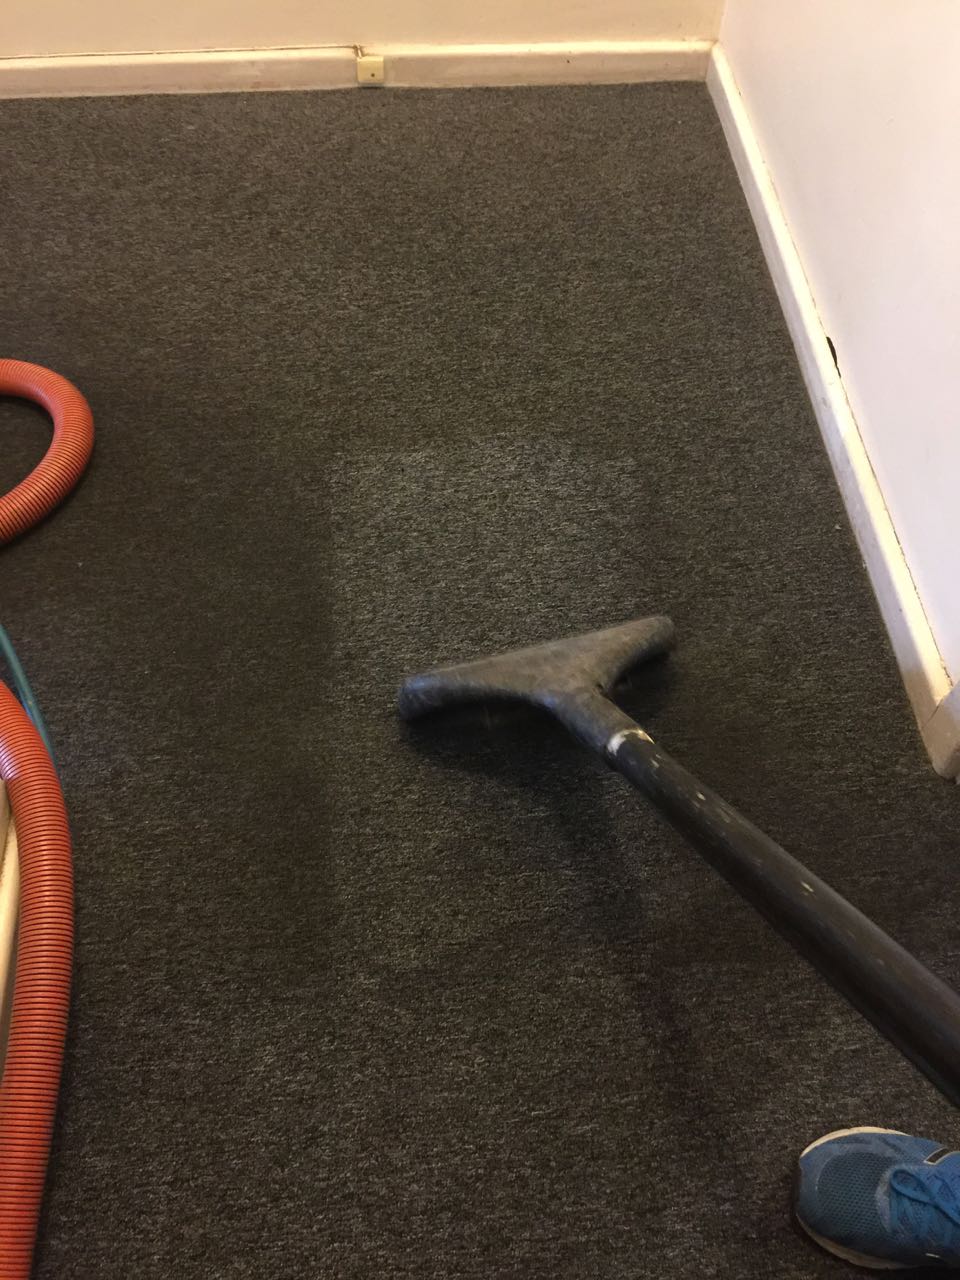 Residential carpet cleaning in suburban Adelaide using the steam clean method